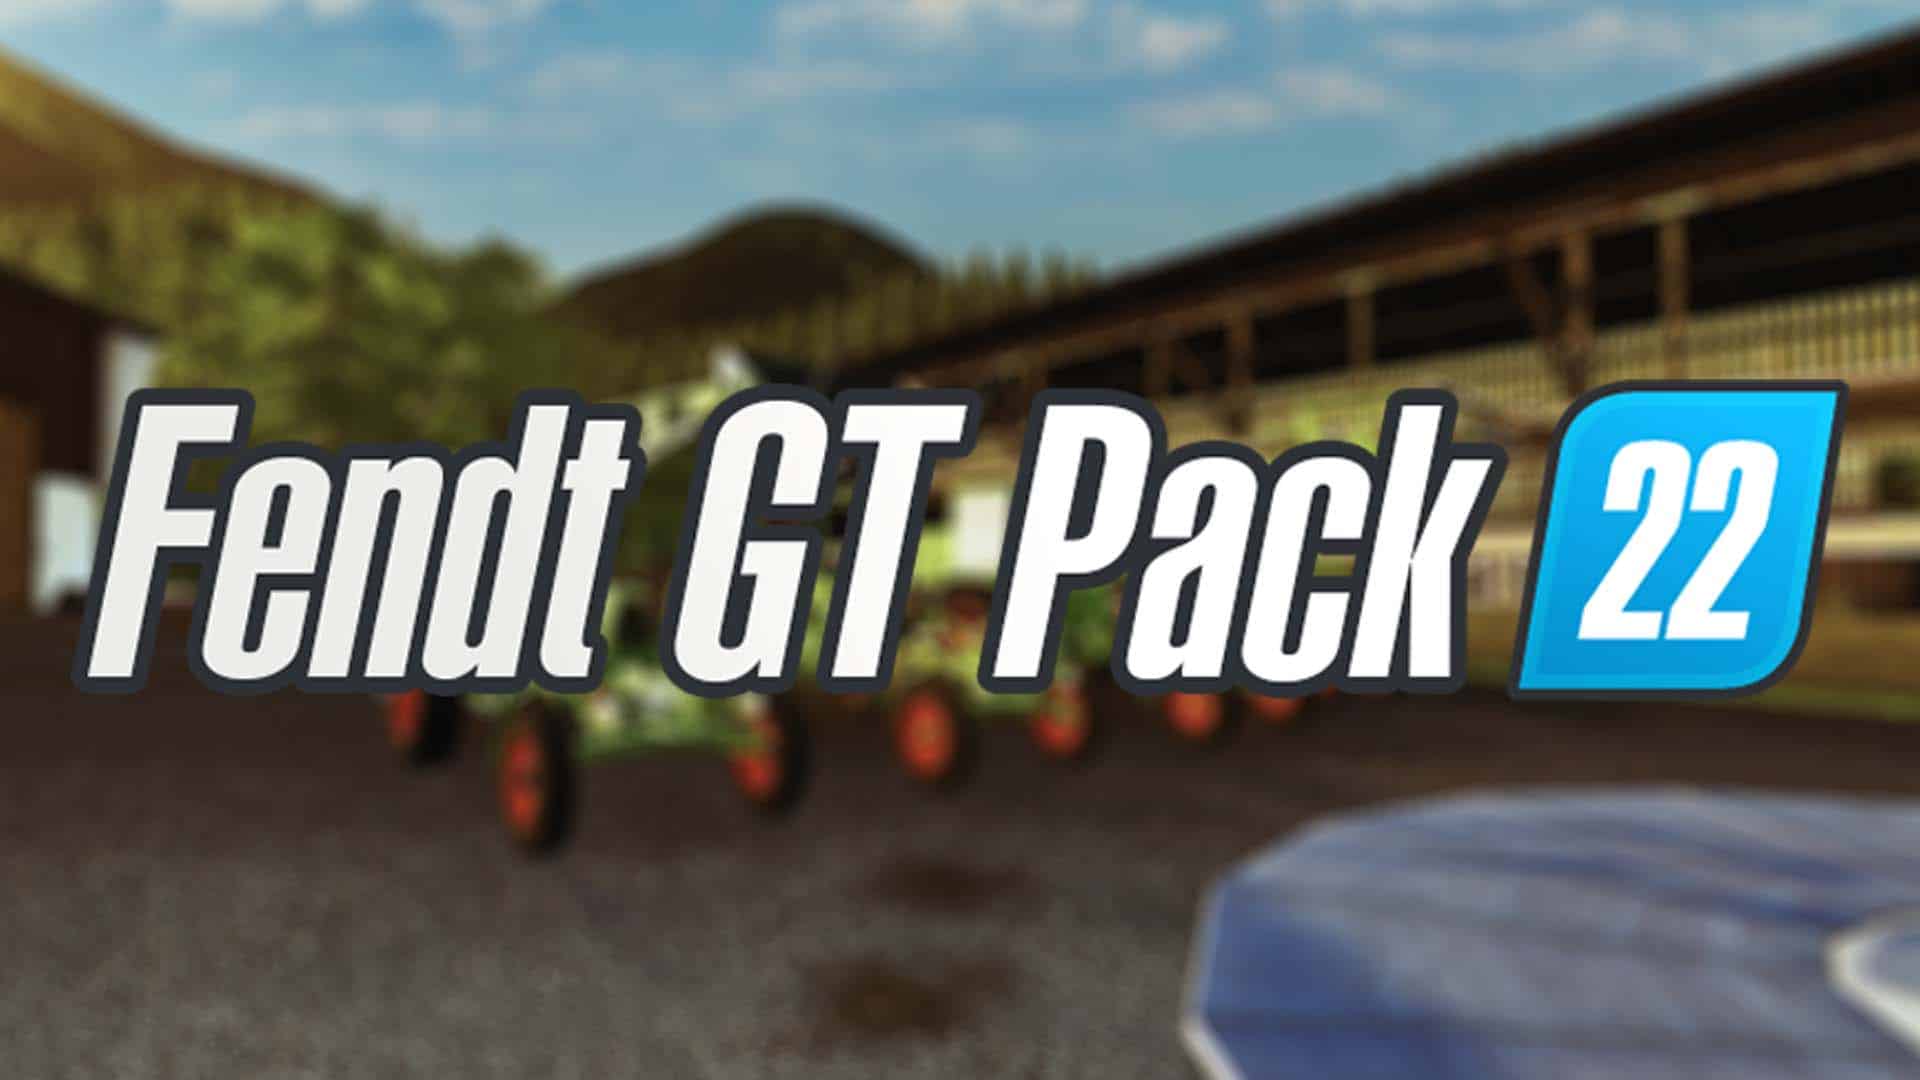 LS22 Fendt GT Pack by Polofreak211 Cover